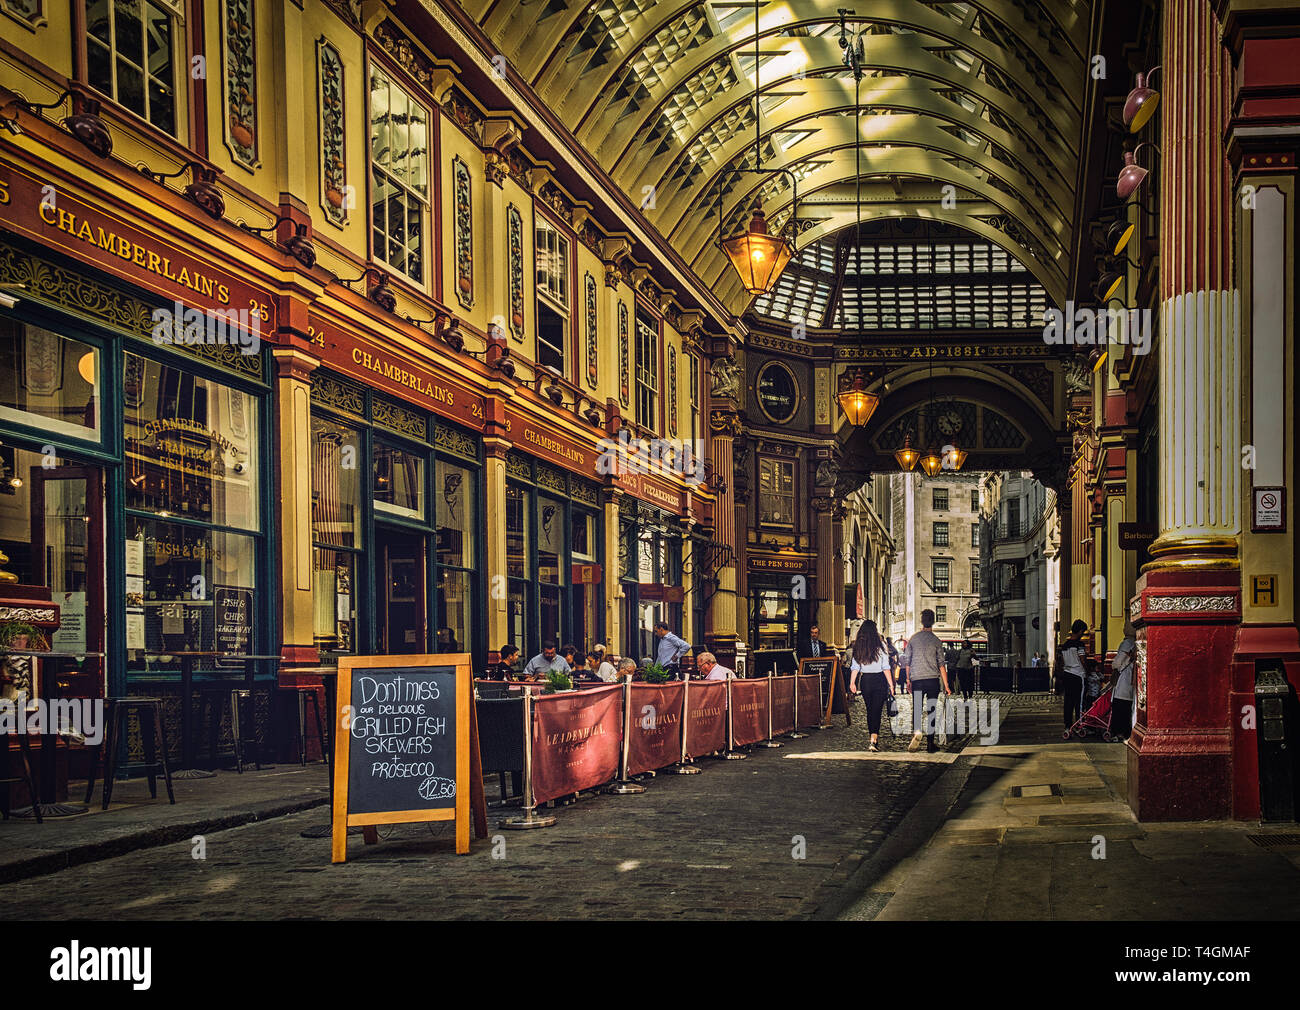 London, UK, Aug 2018, Chamberlain's seafood and fish restaurant in the City of London. Leadenhall Market. Stock Photo